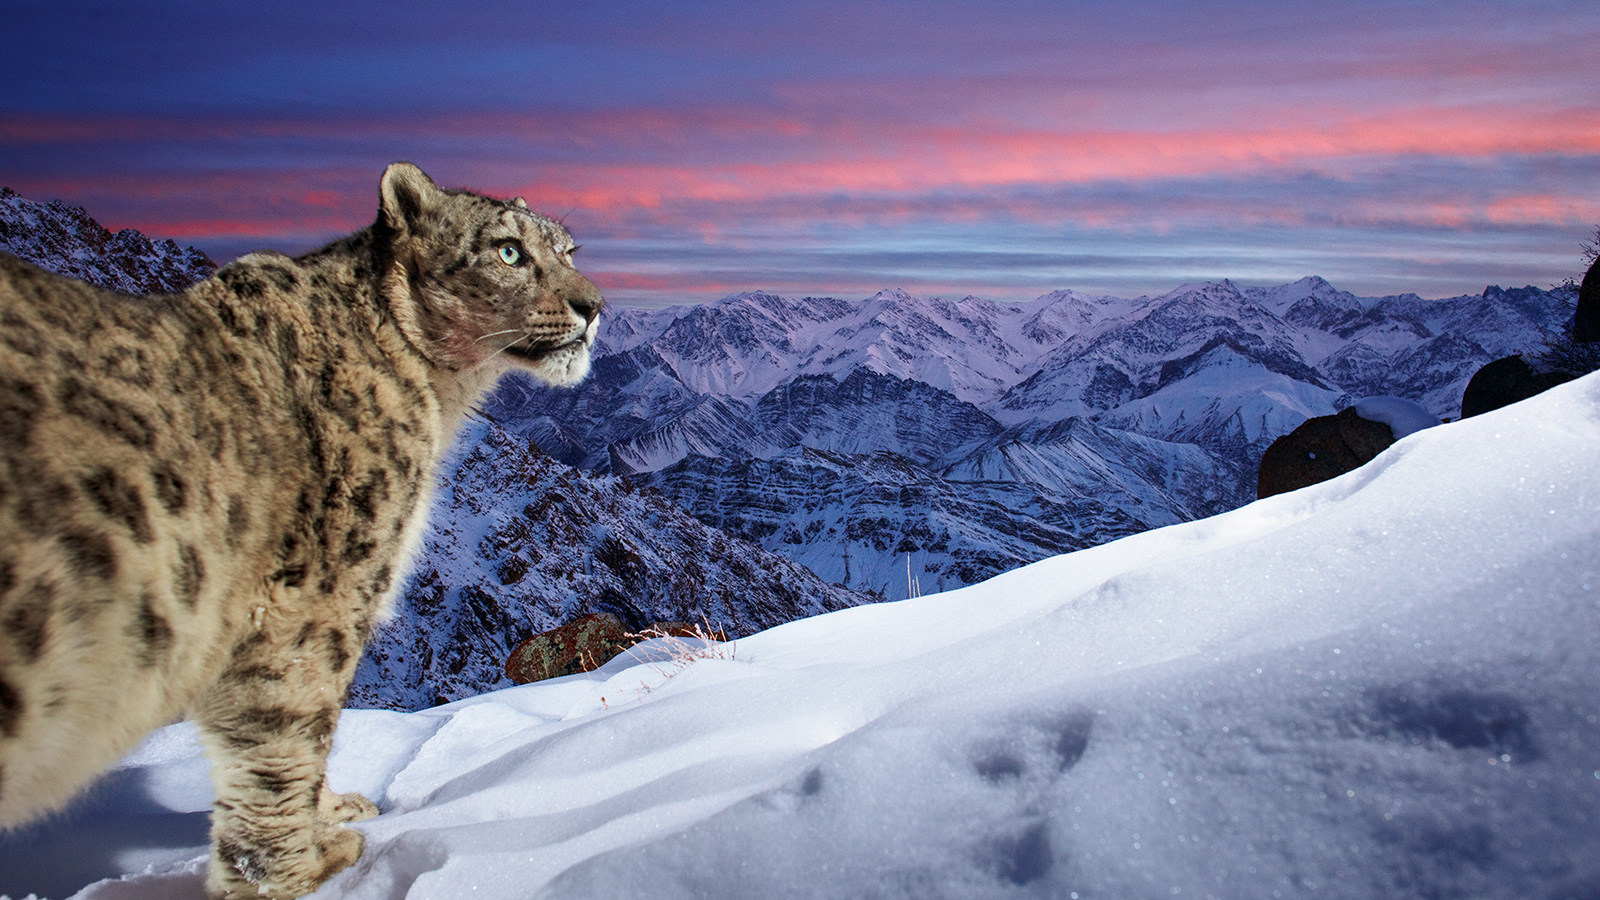 Snow leopard picture wins Wildlife Photographer of the Year People's Choice  Award | CNN Travel